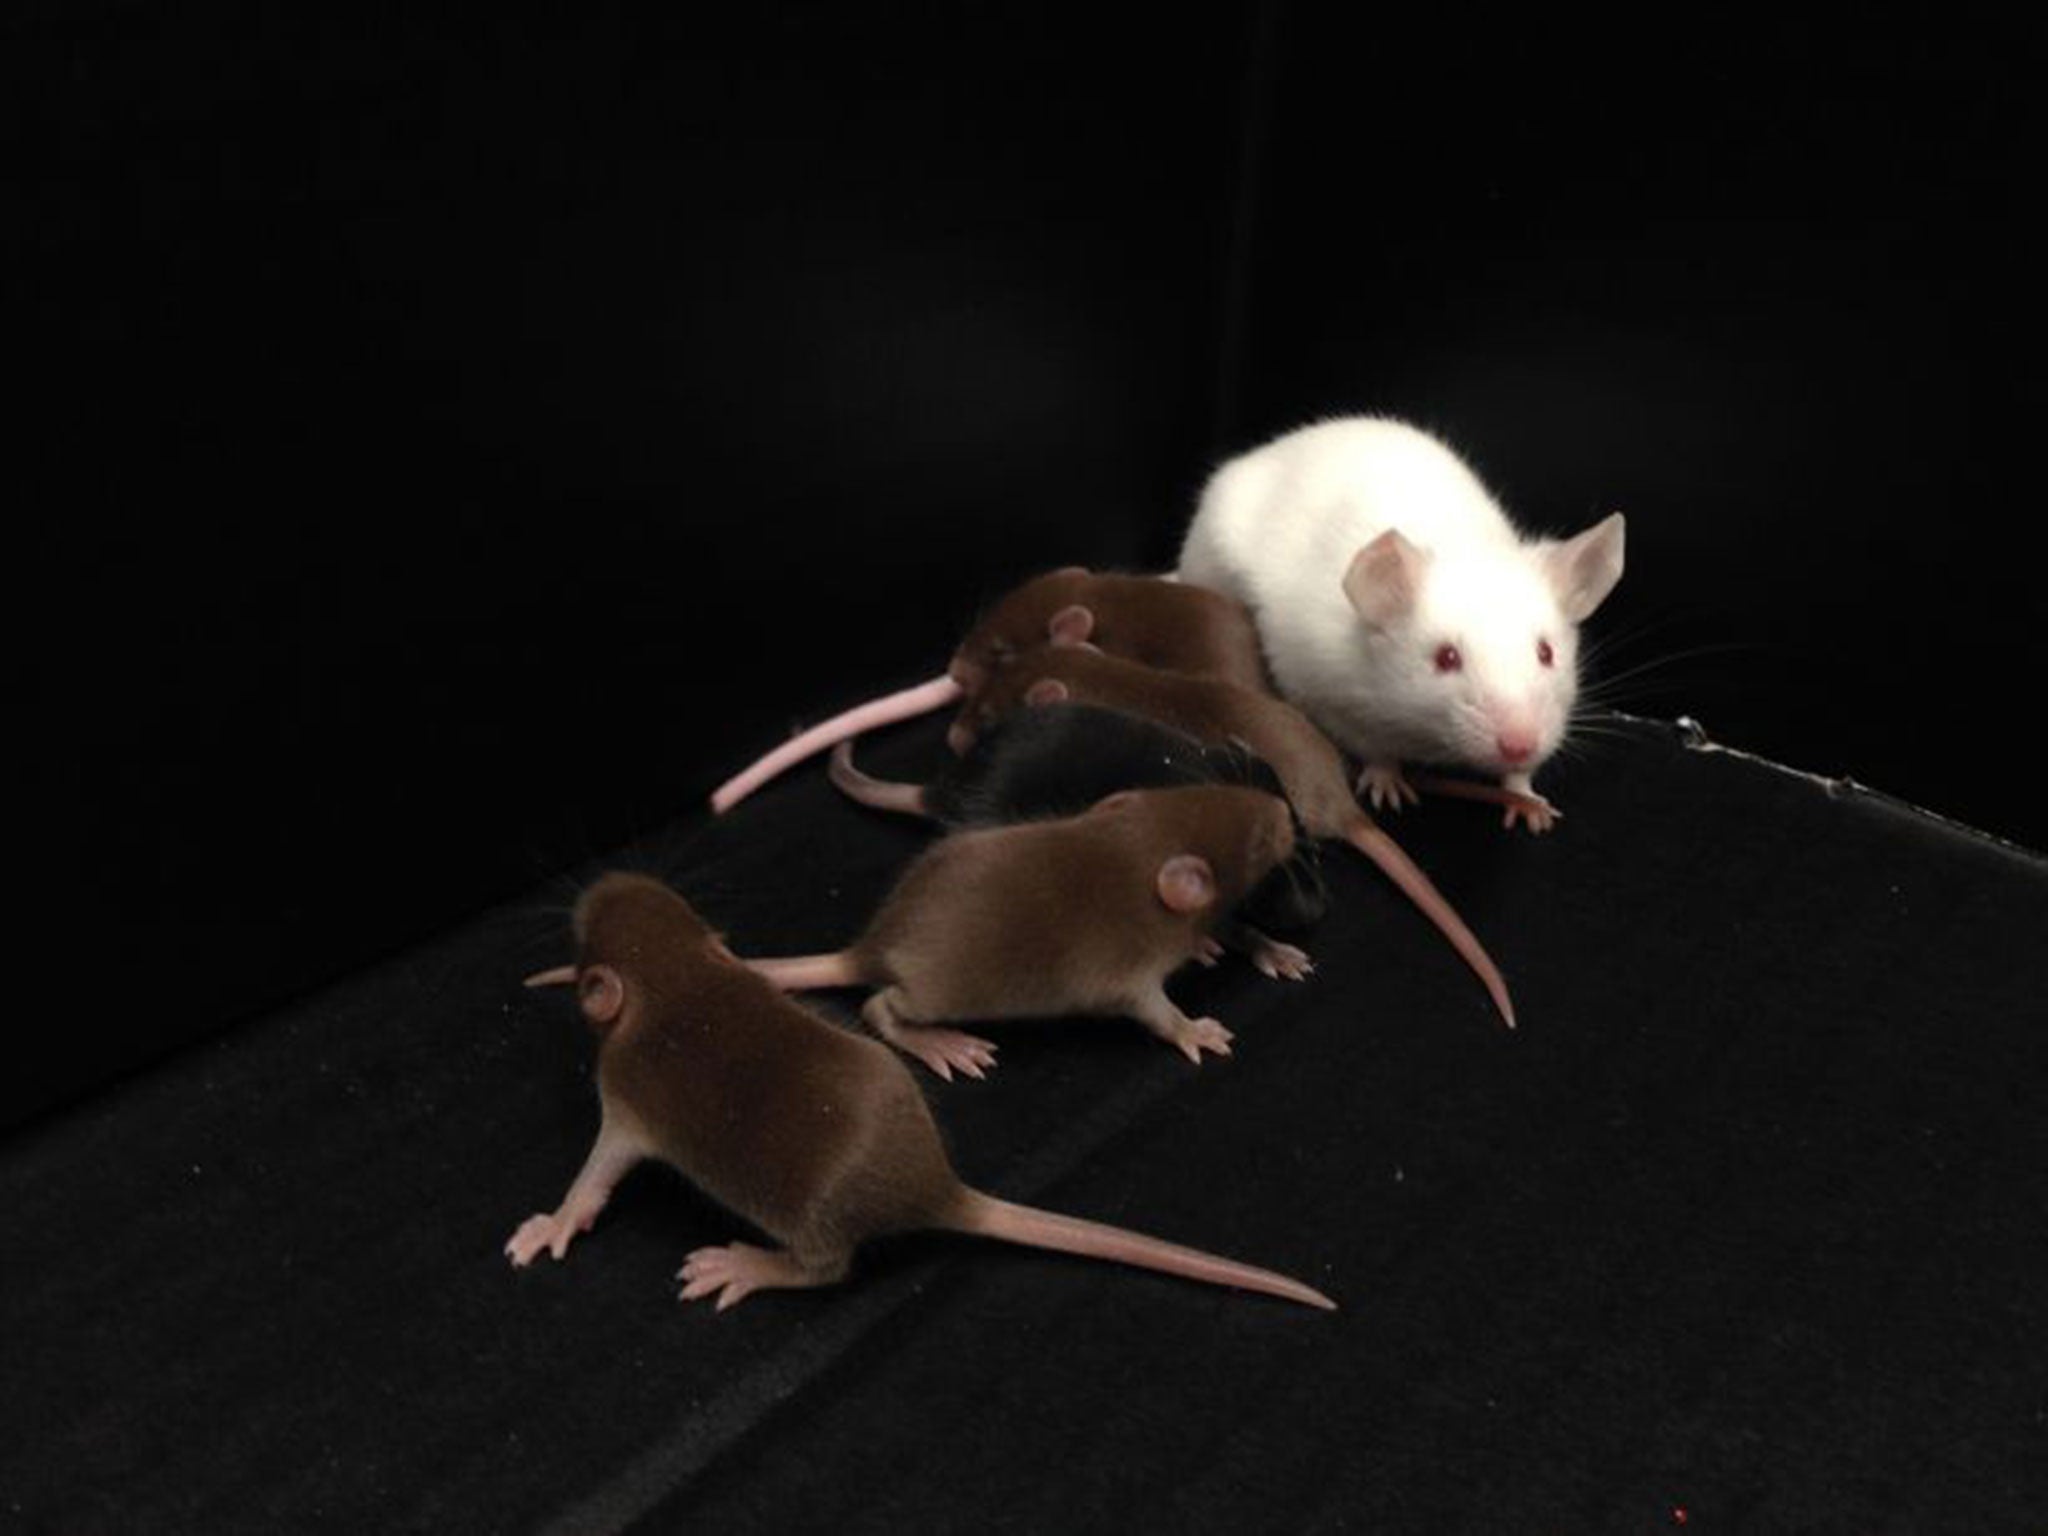 Scientists have created male laboratory mice without a Y chromosome that are still able to sire offspring